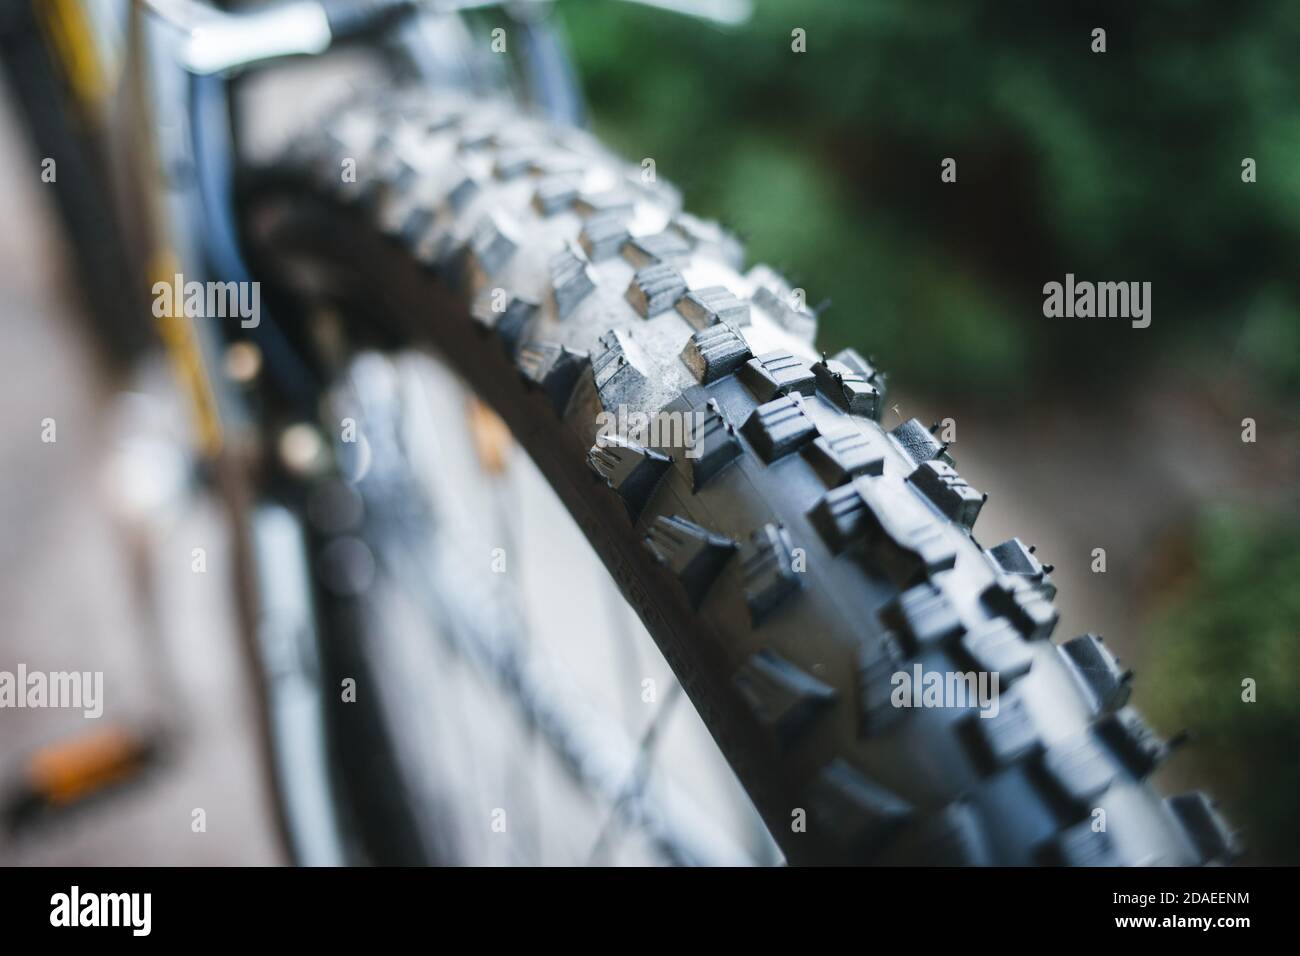 Bicycle rubber before and after cleaning. Tire care concept Stock Photo